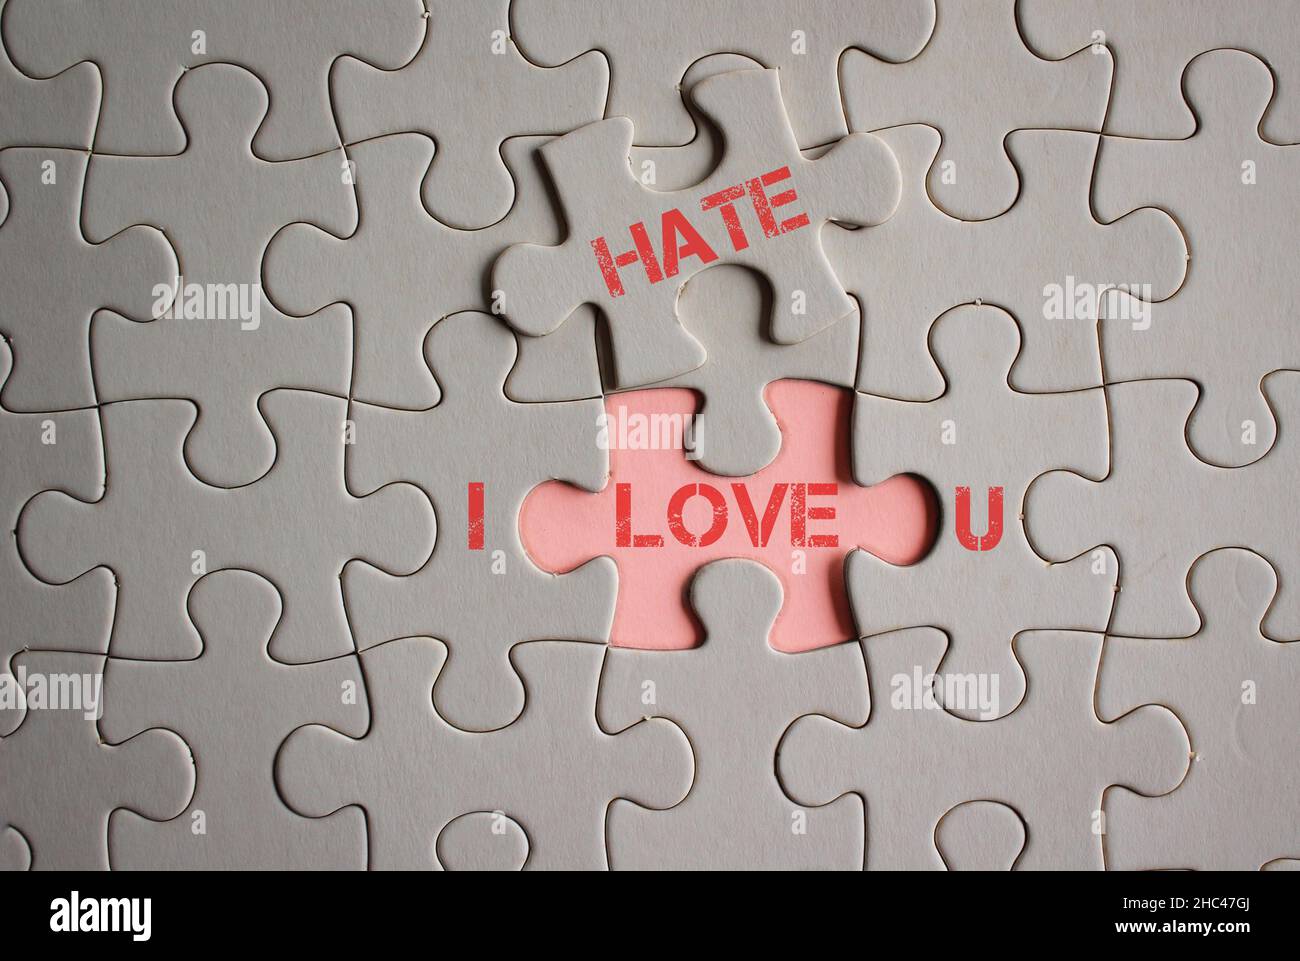 Concept of love hate relationship. I LOVE HATE U words written on pieces of jigsaw puzzle. Stock Photo